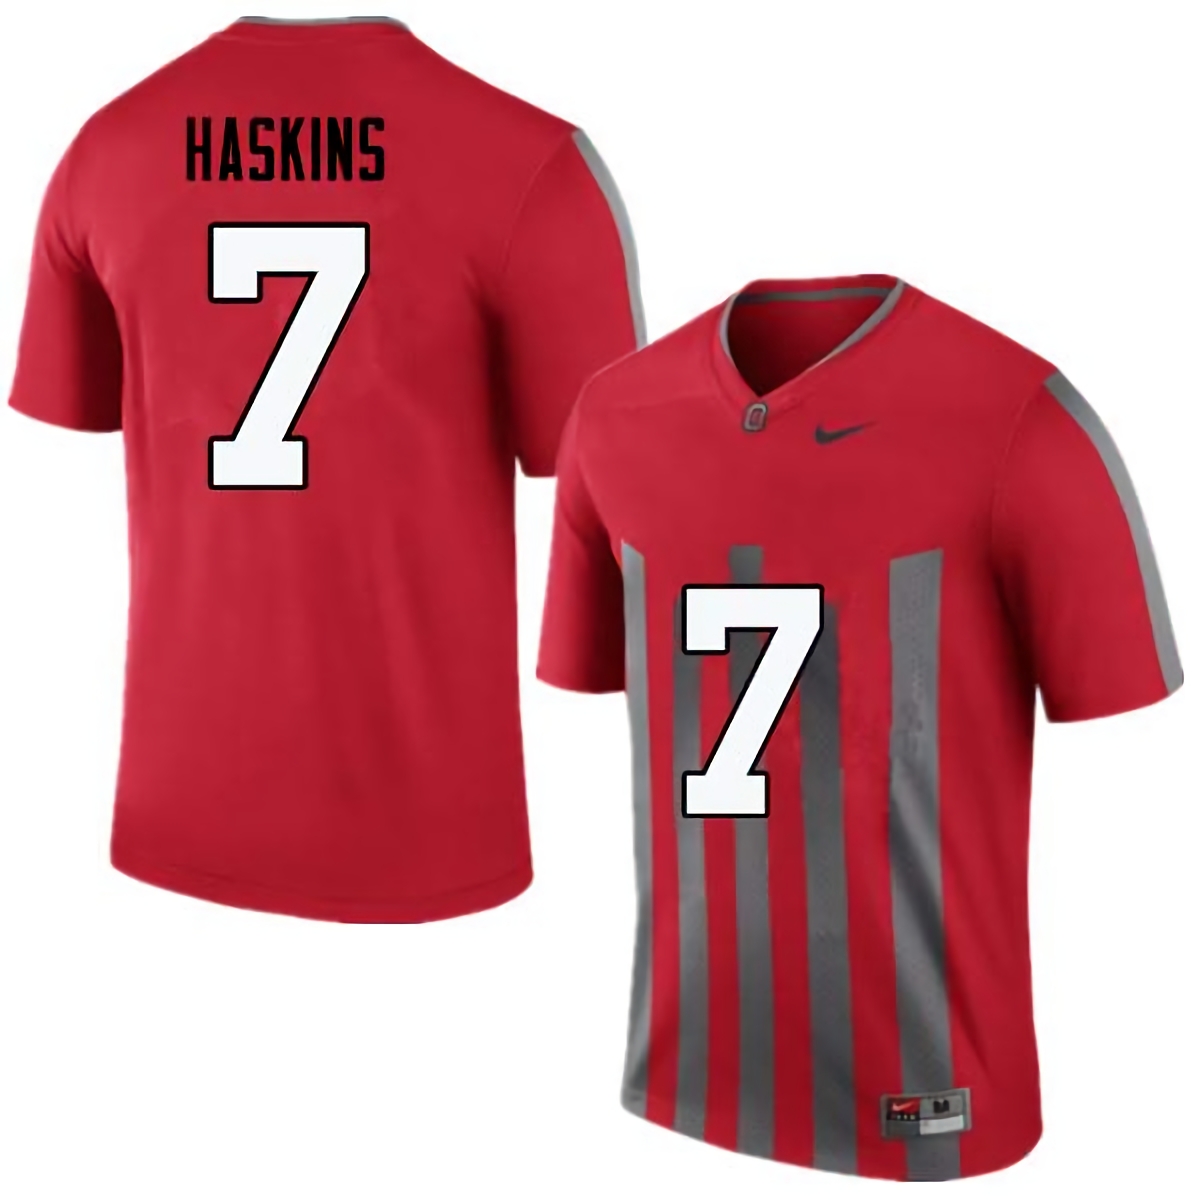 Dwayne Haskins Ohio State Buckeyes Men's NCAA #7 Nike Throwback Red College Stitched Football Jersey PFJ1456VH